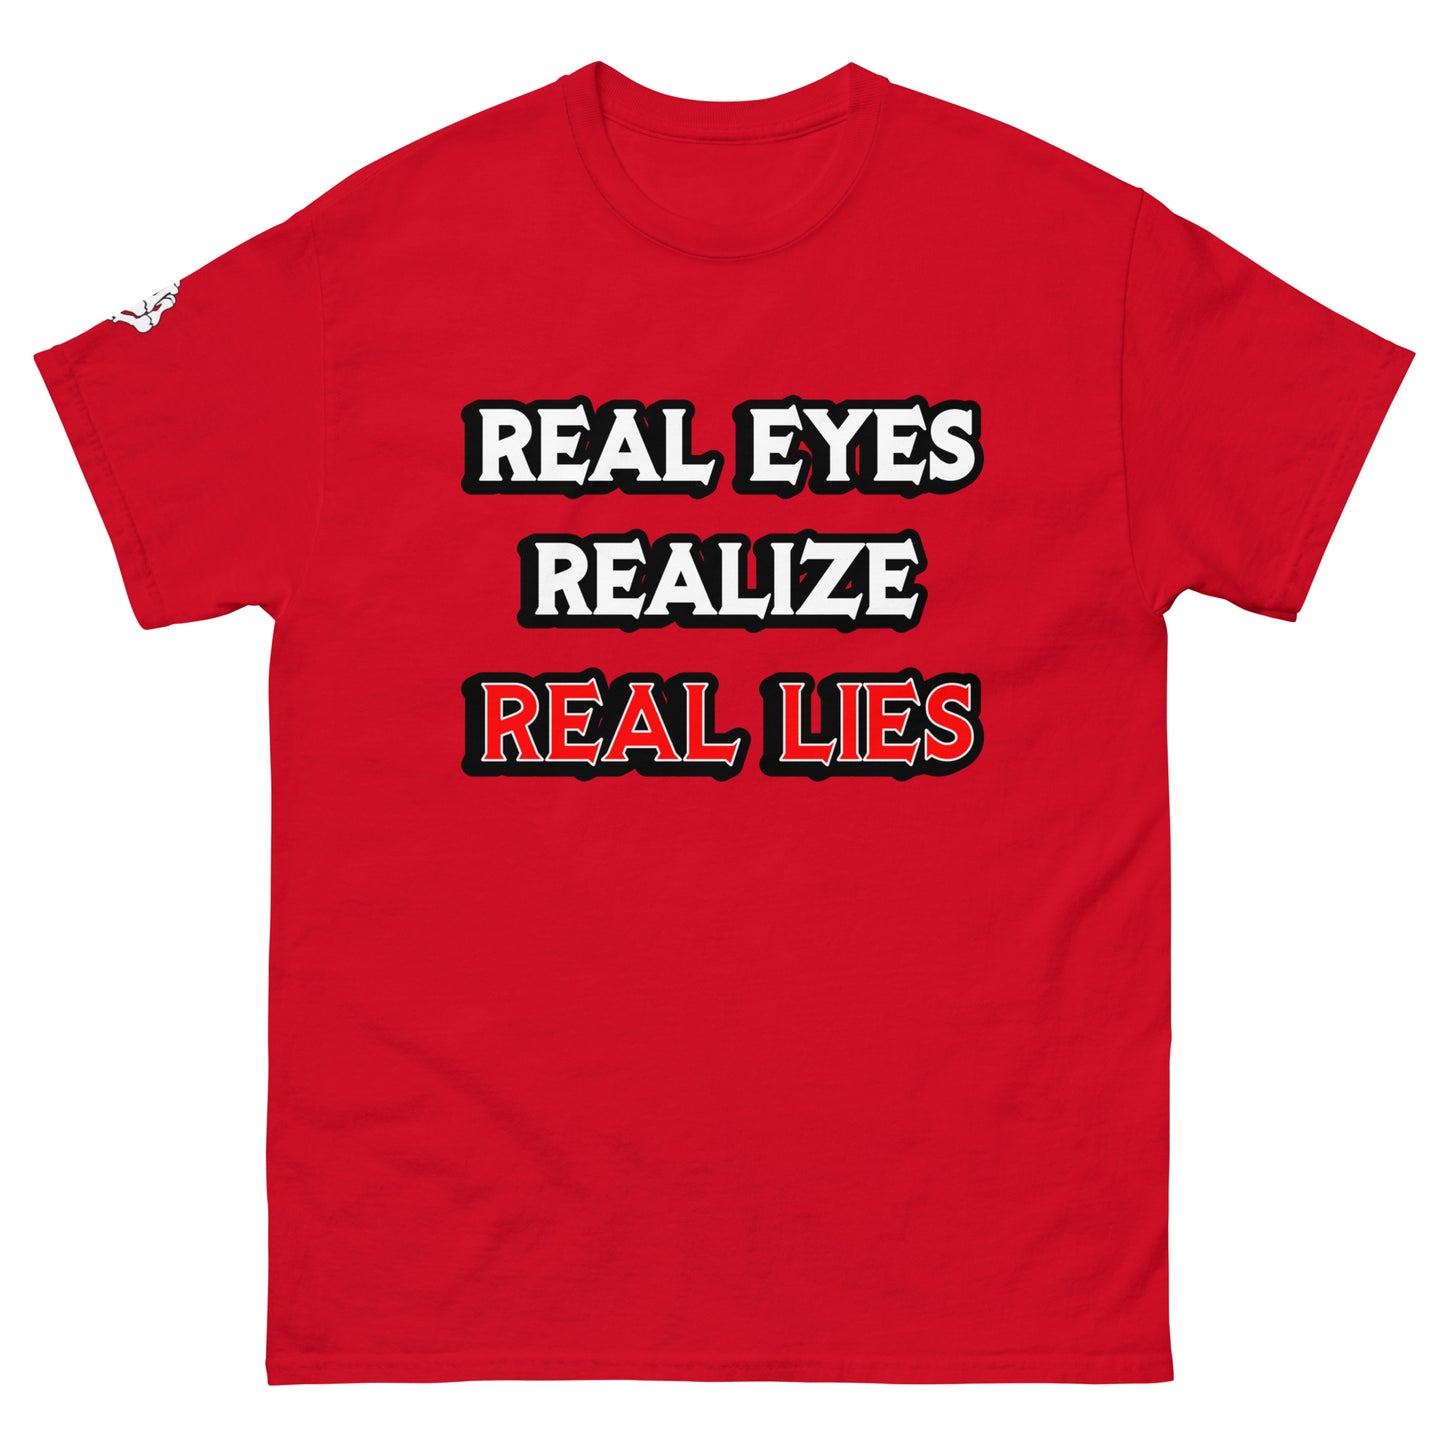 Real Eyes, Realize, Real Lies -  classic tee